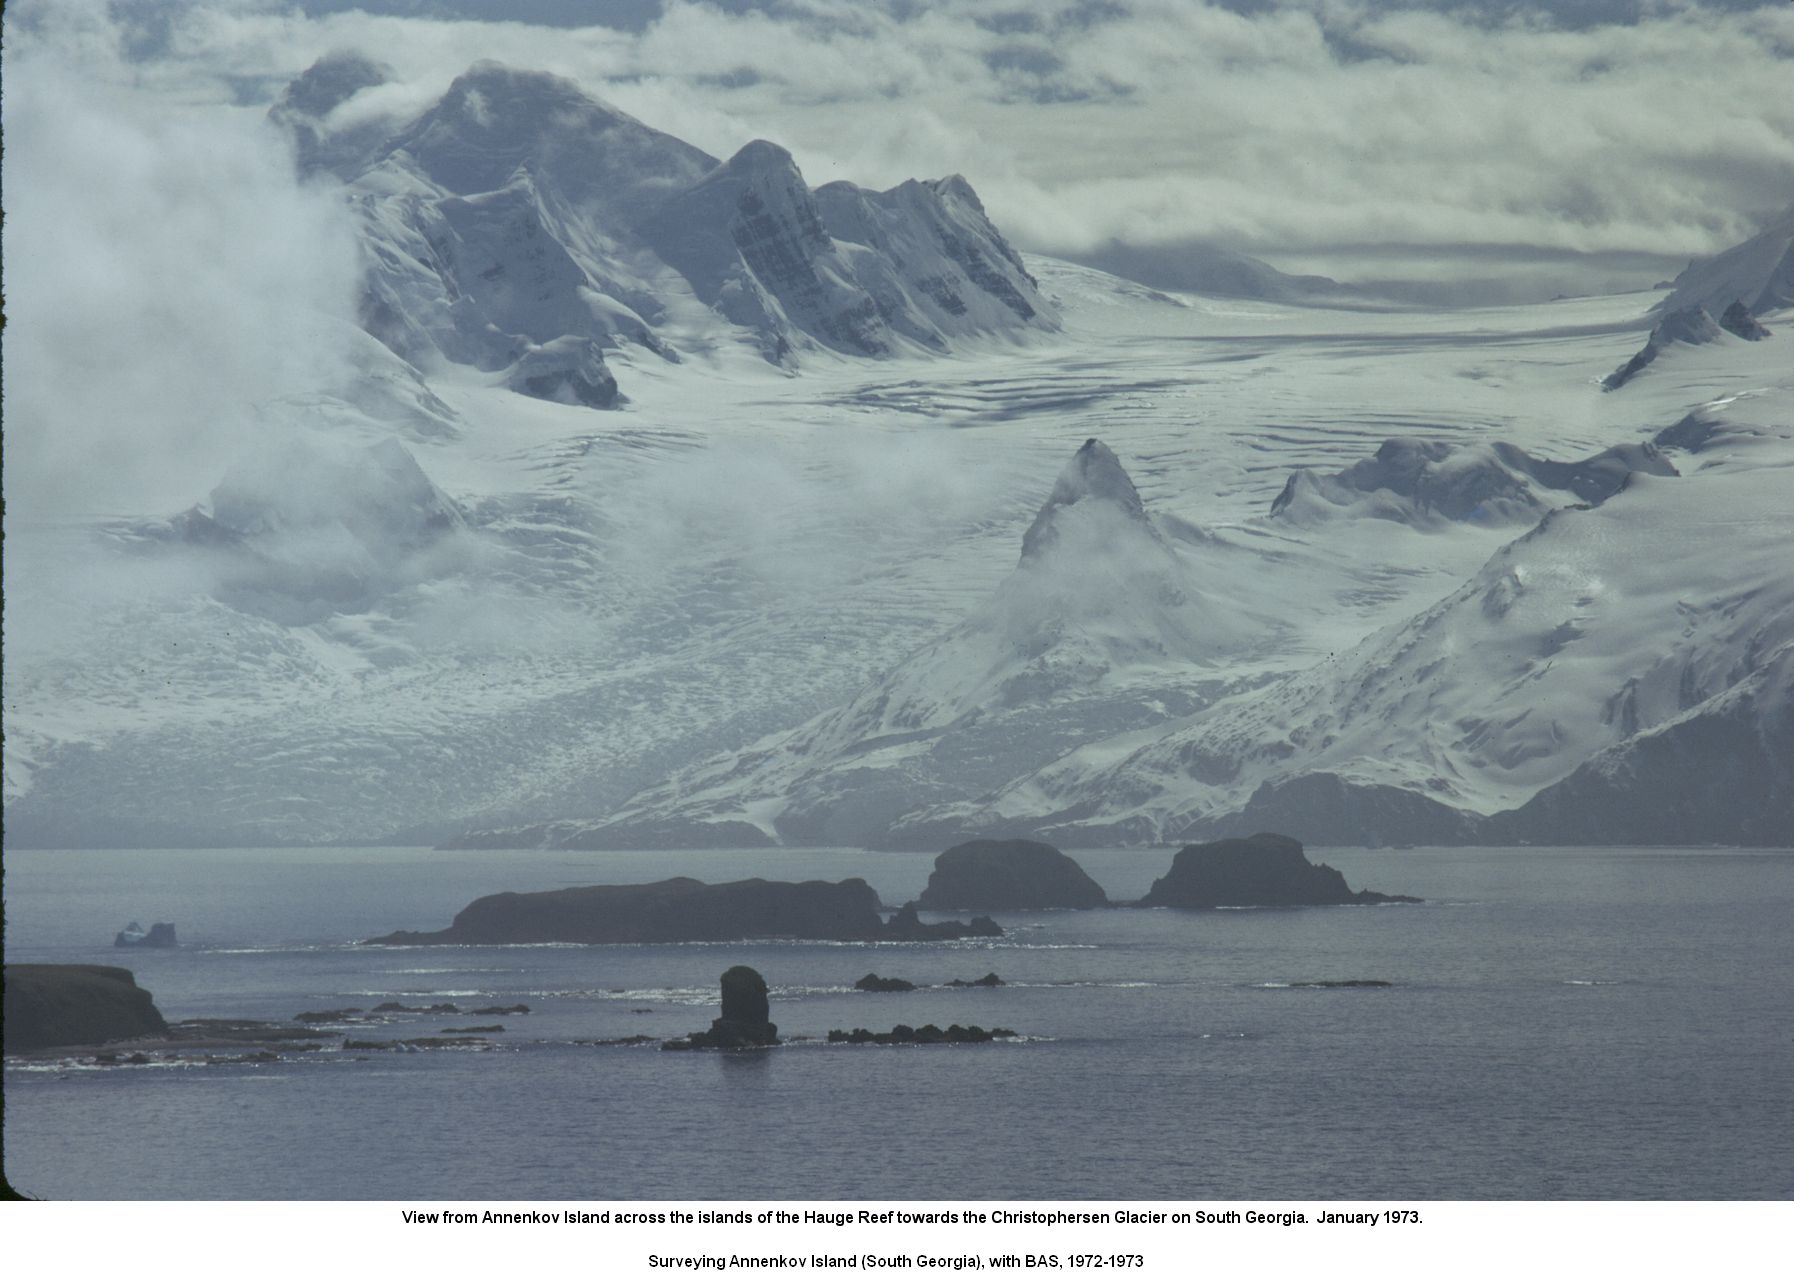 View from Annenkov Island across the islands of the Hauge Reef towards the Christophersen Glacier on South Georgia. January 1973.